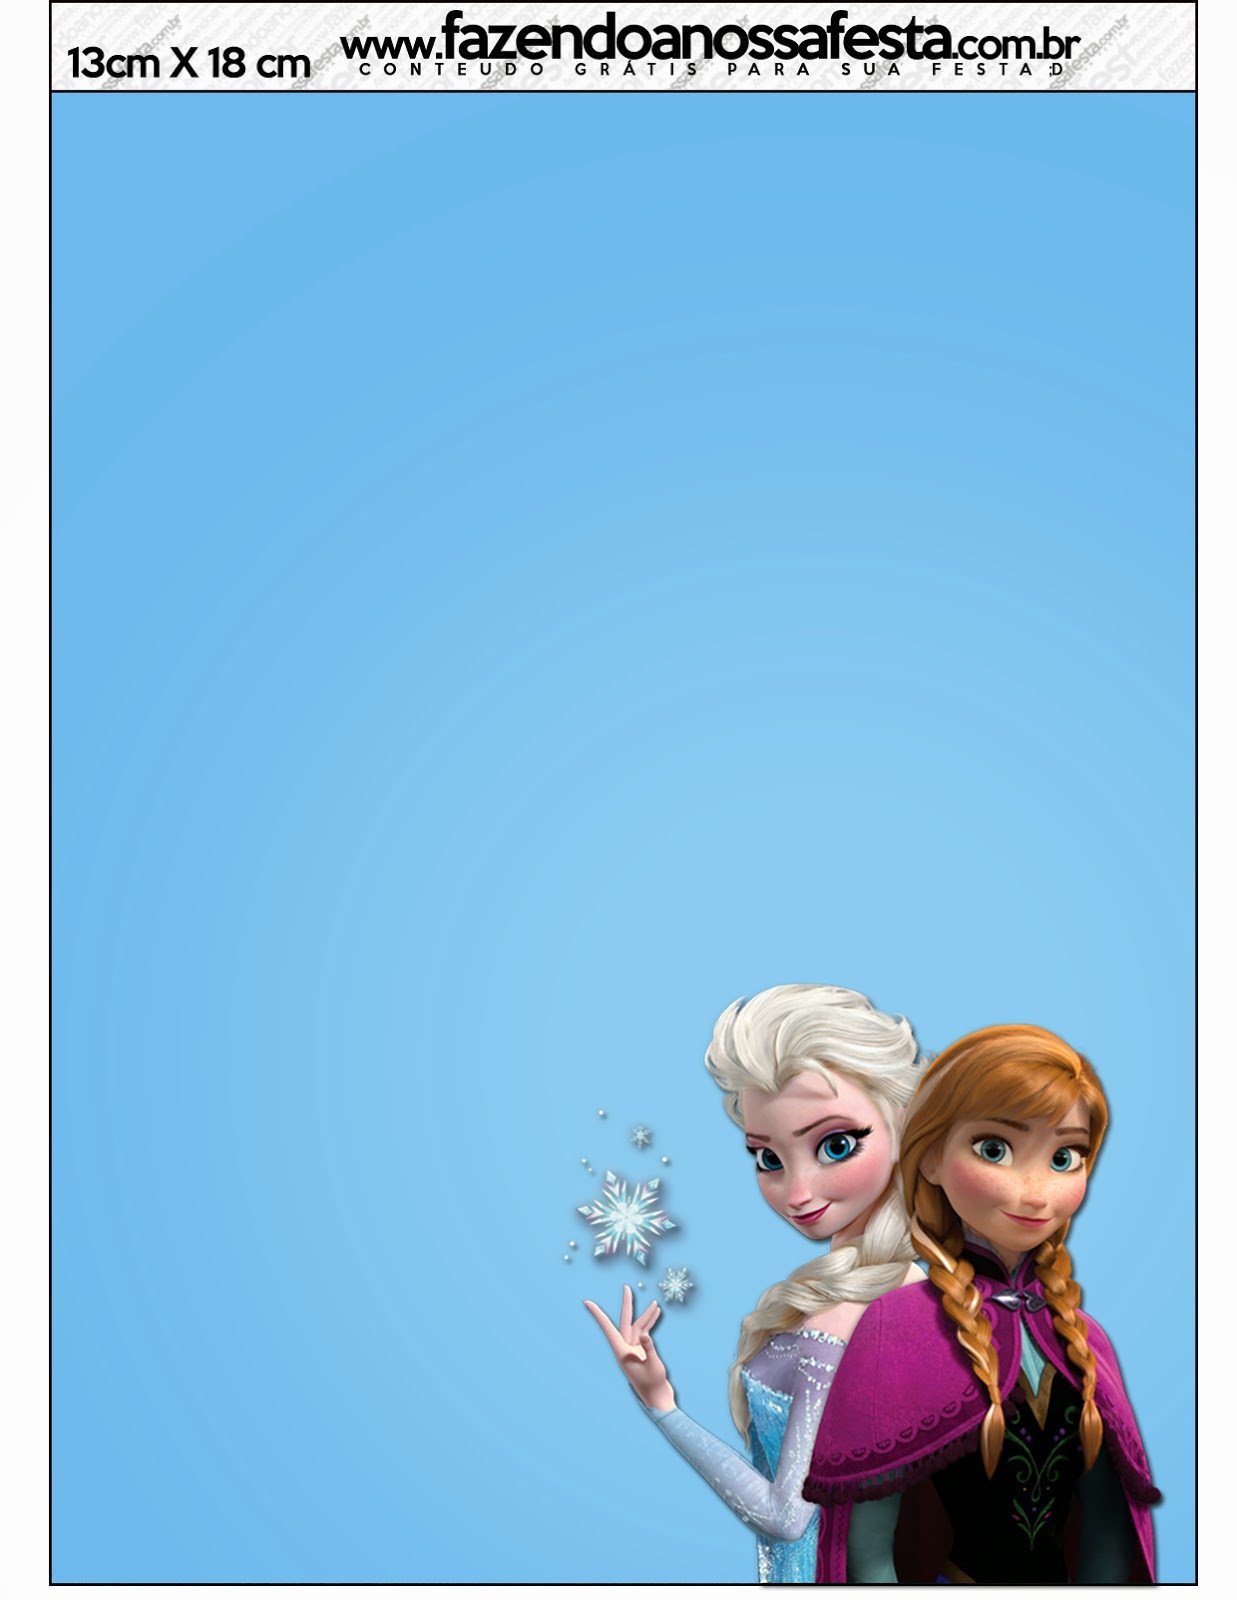 Free Printable Frozen Invites Frozen Free Printable Cards or Party Invitations